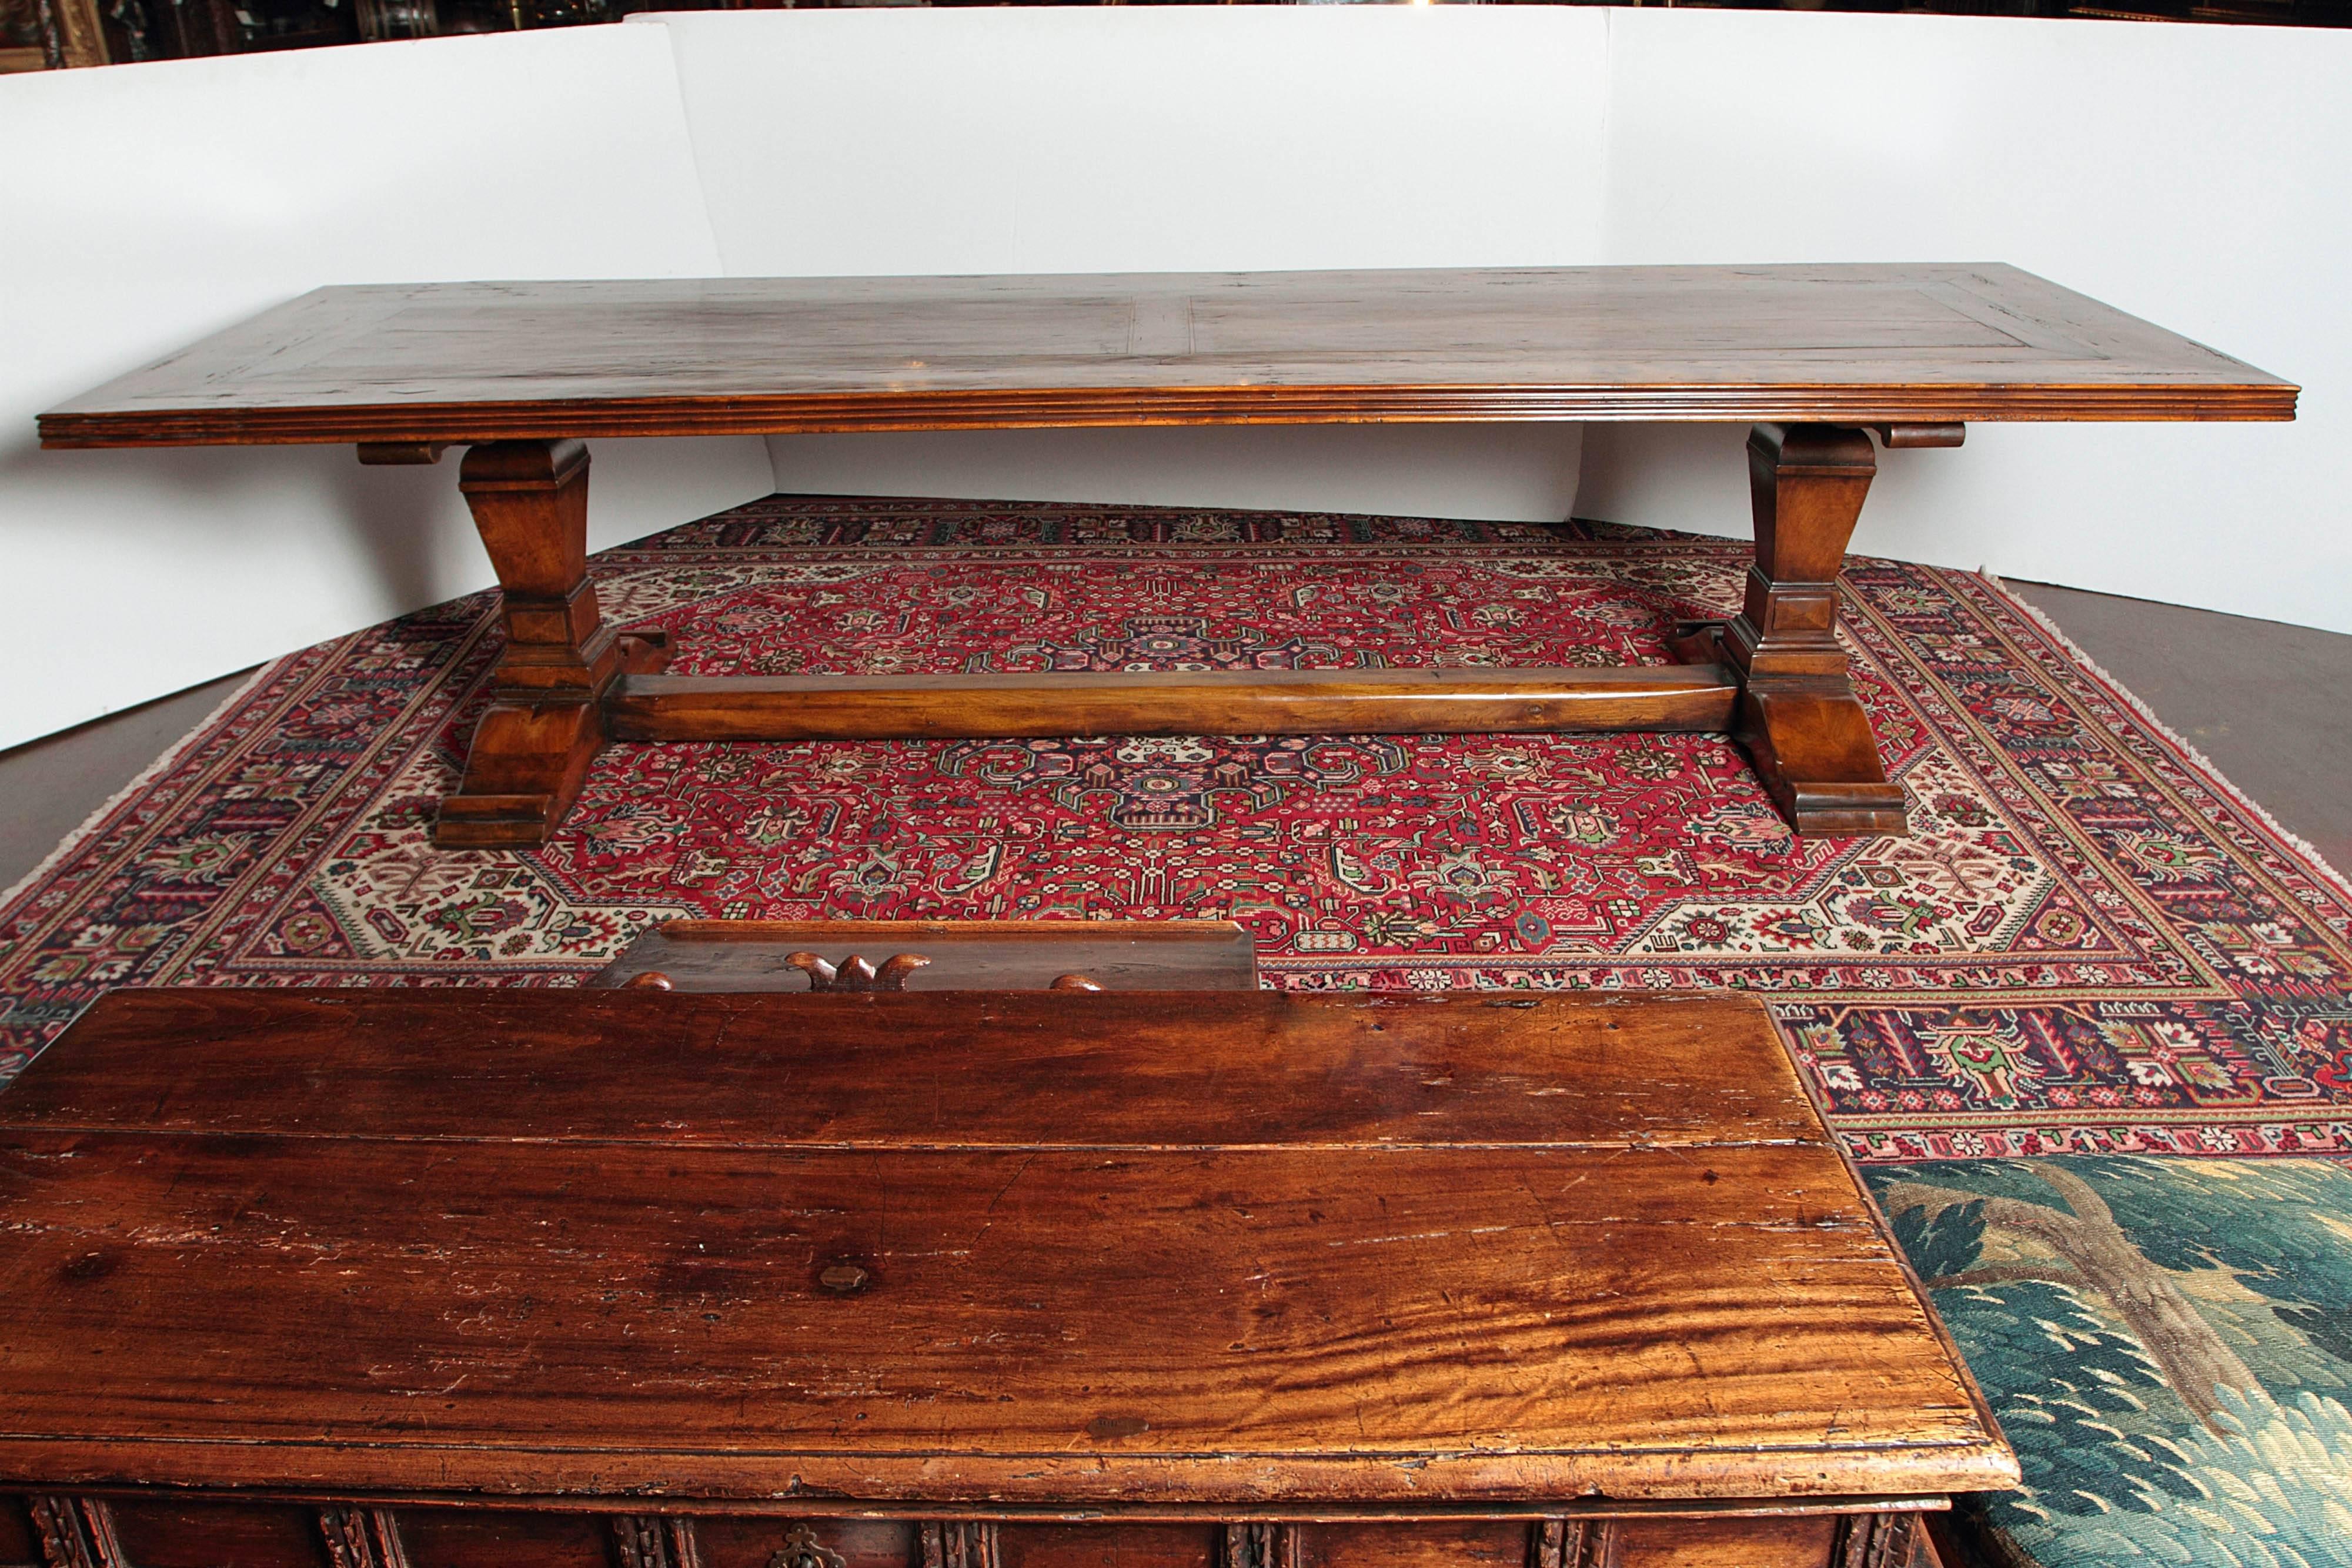 Long 19th century walnut trestle farm table from the French Pyrenees (circa: 1860). Two carved pedestals with a center stretcher support the large top with has inlays bands all around. Will seat 10 to 14. Some restoration. 